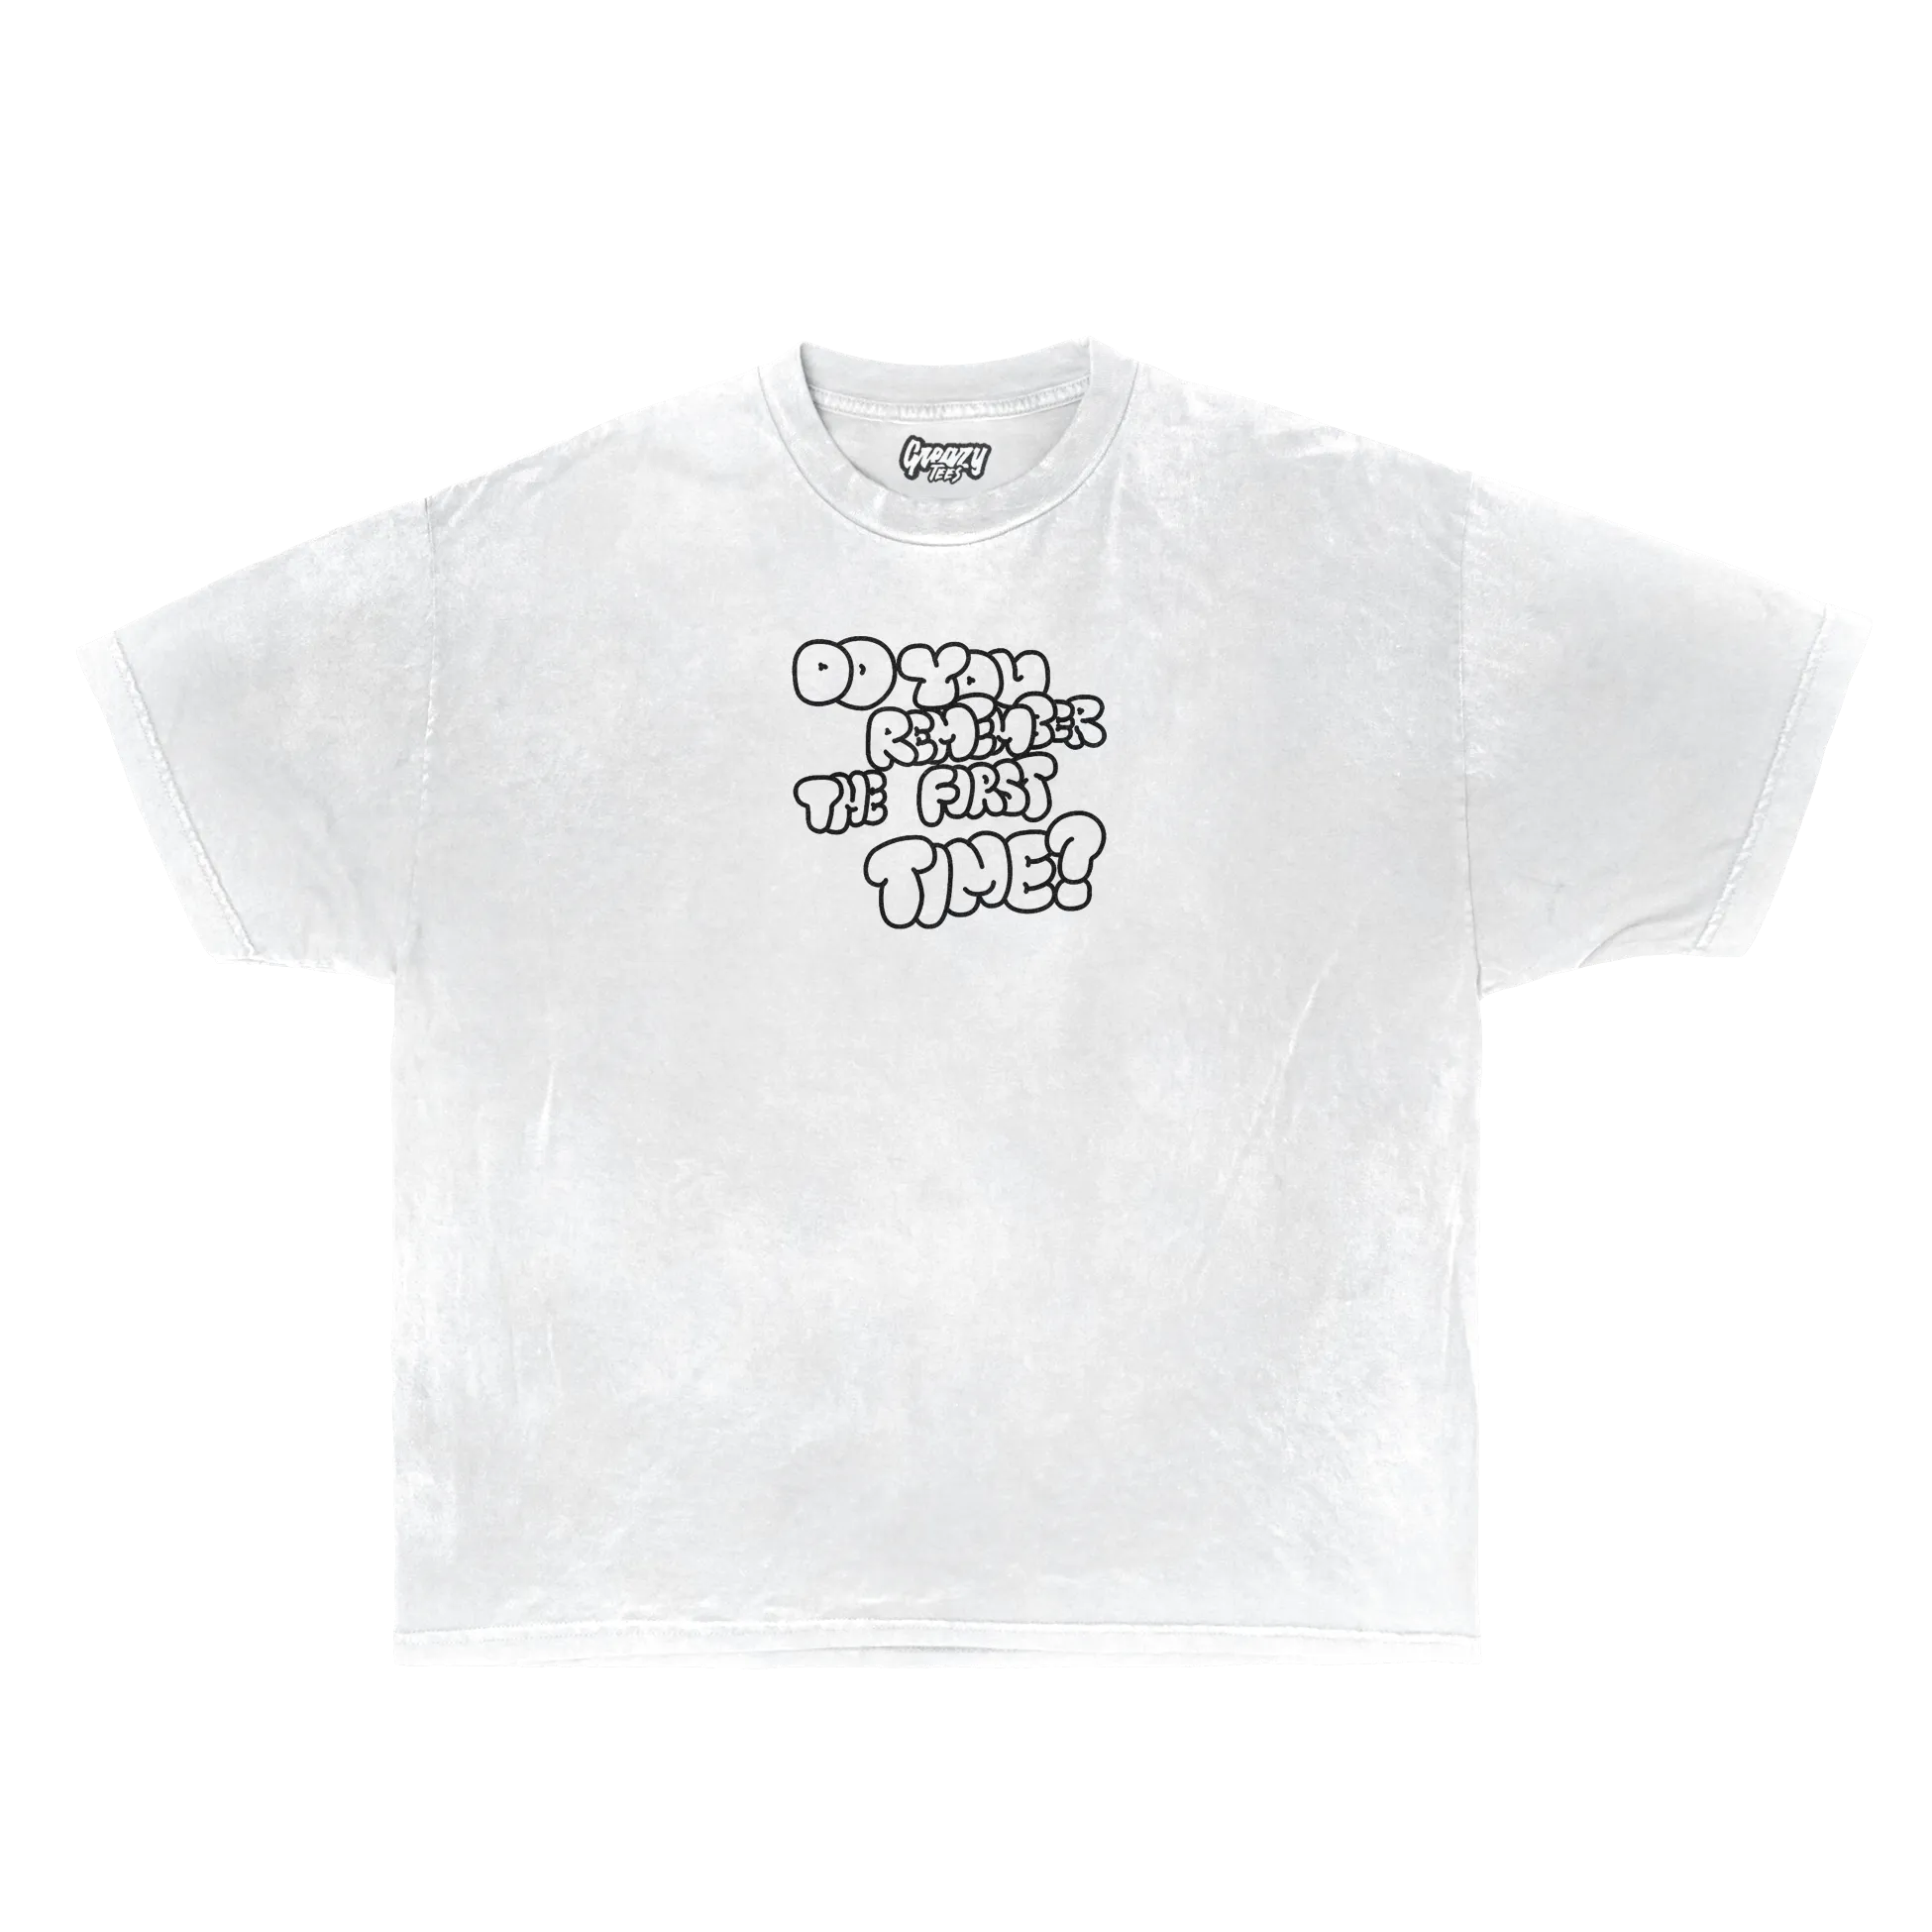 First Time Tee Tee Greazy Tees XS White Oversized